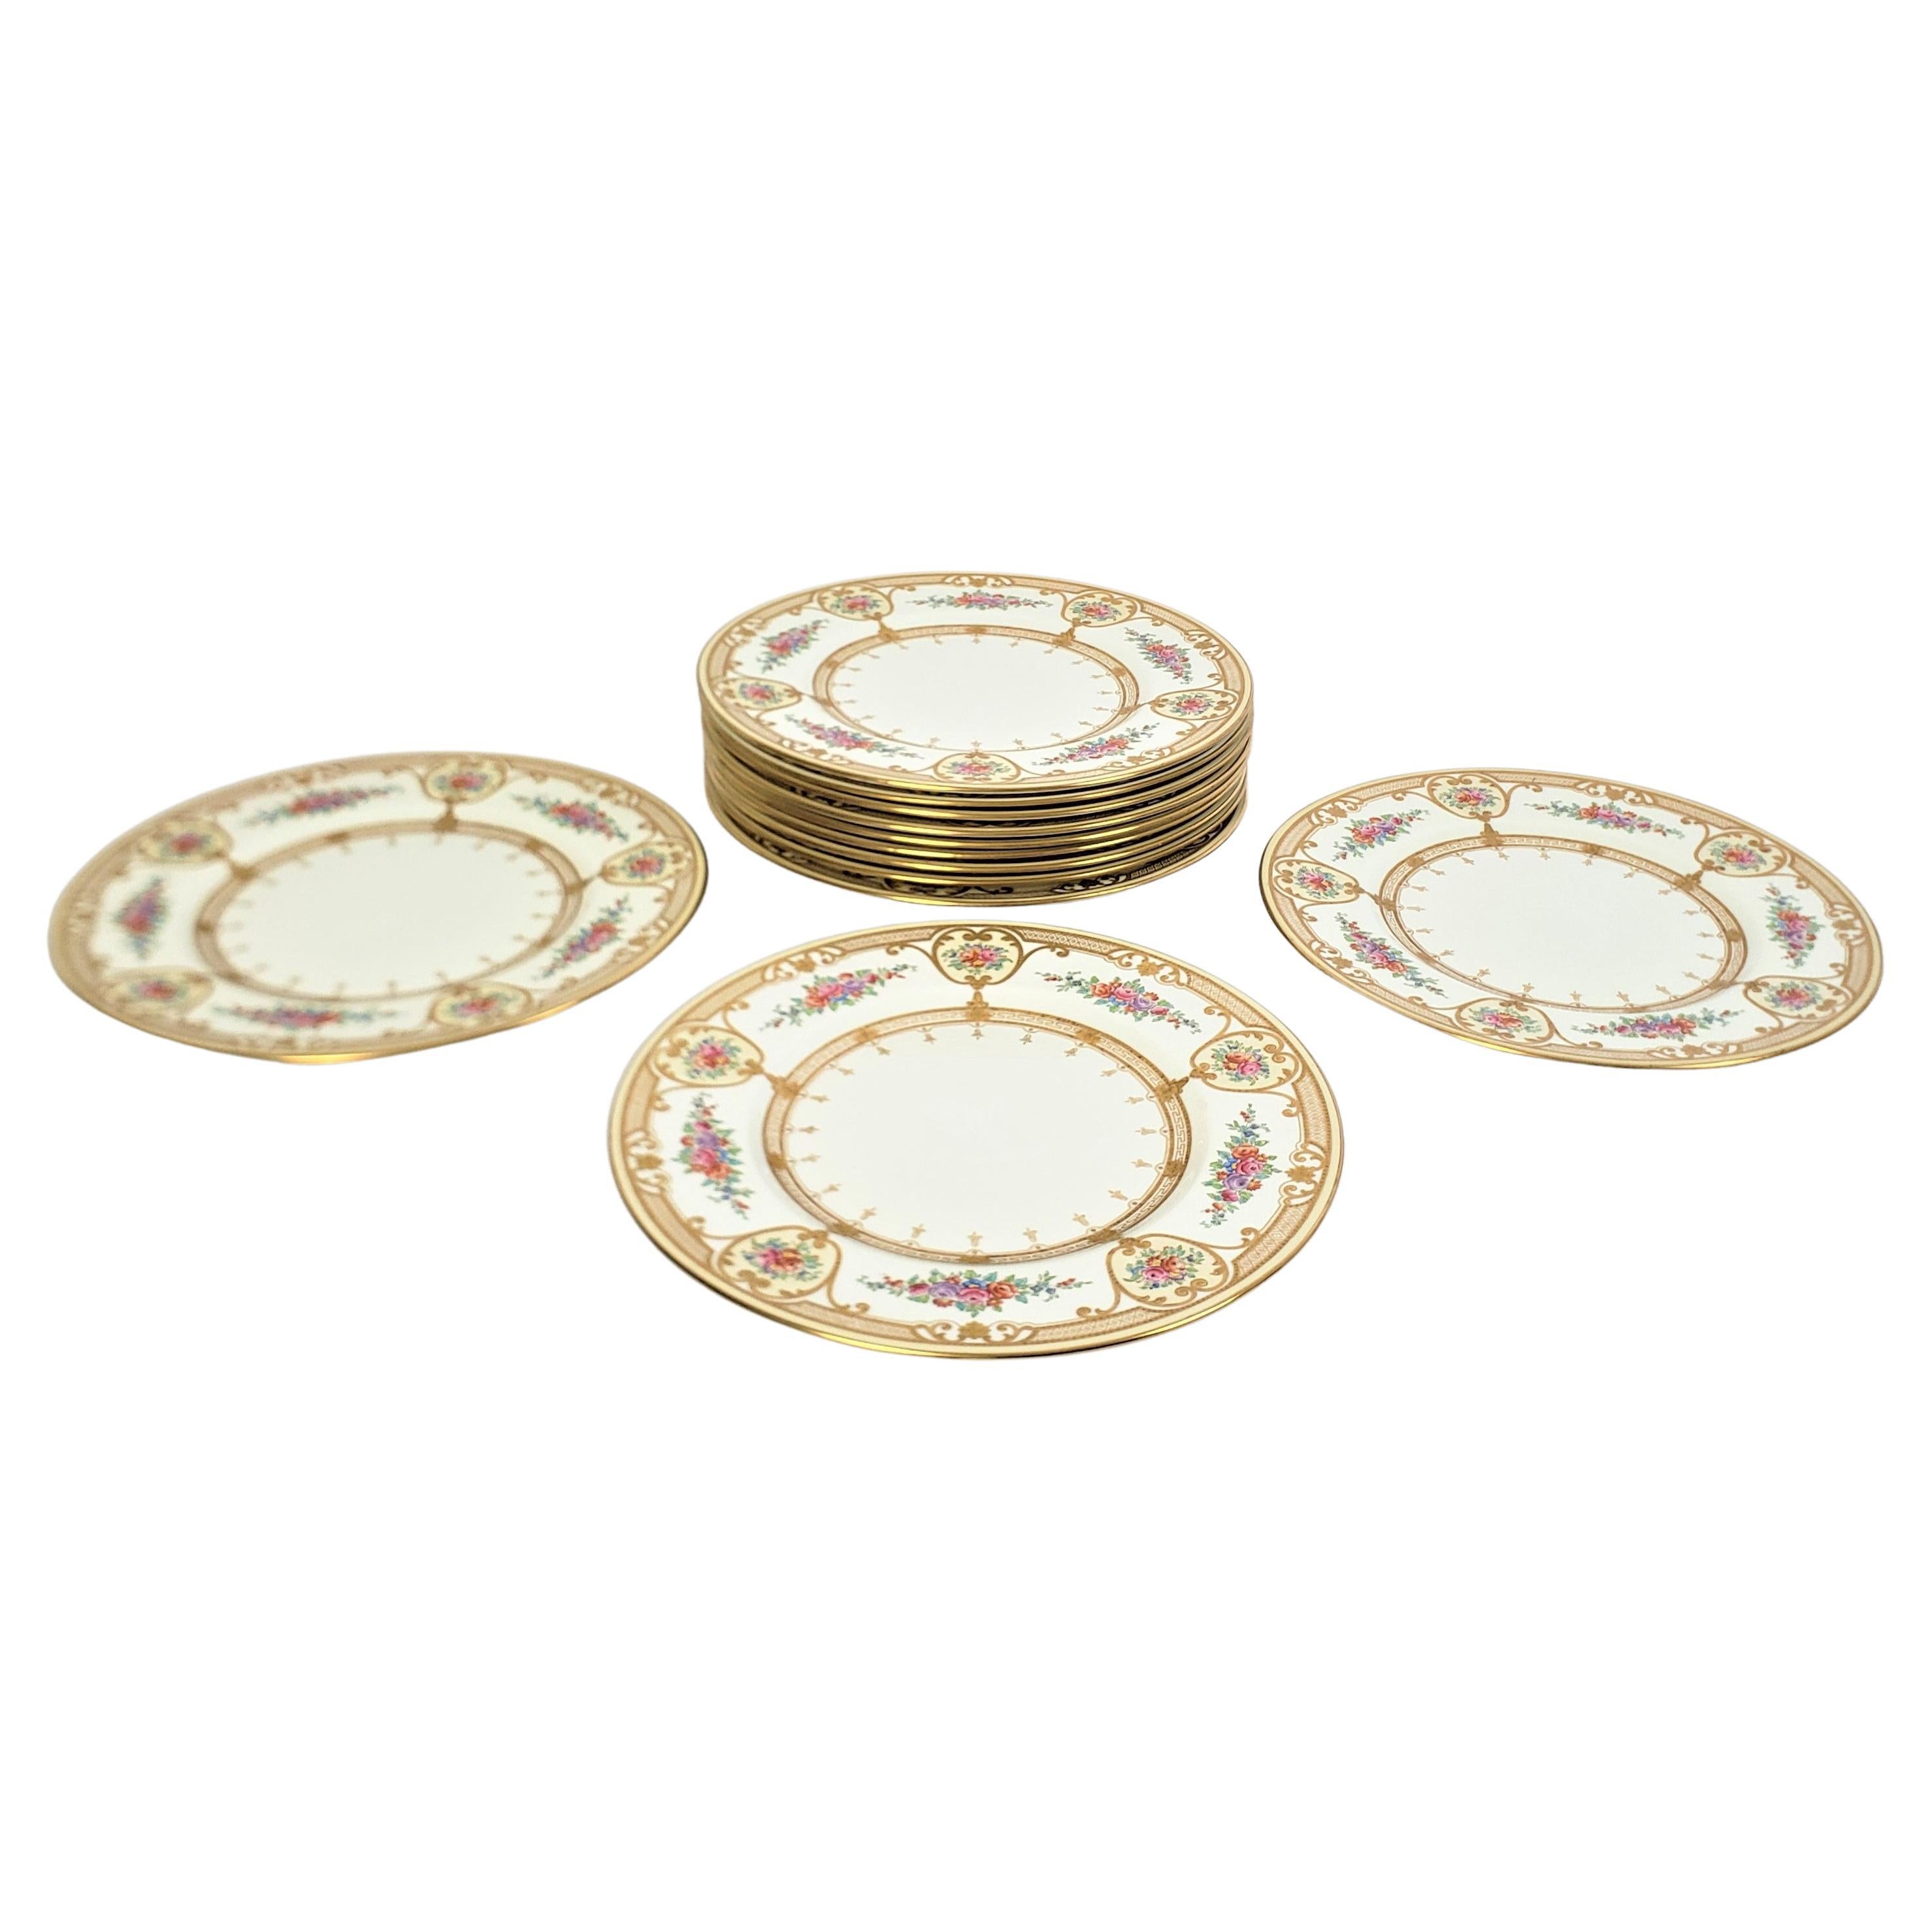 Set of 12 Antique Wedgewood Dinner Plates with Heavy Gilt & Floral Decoration For Sale